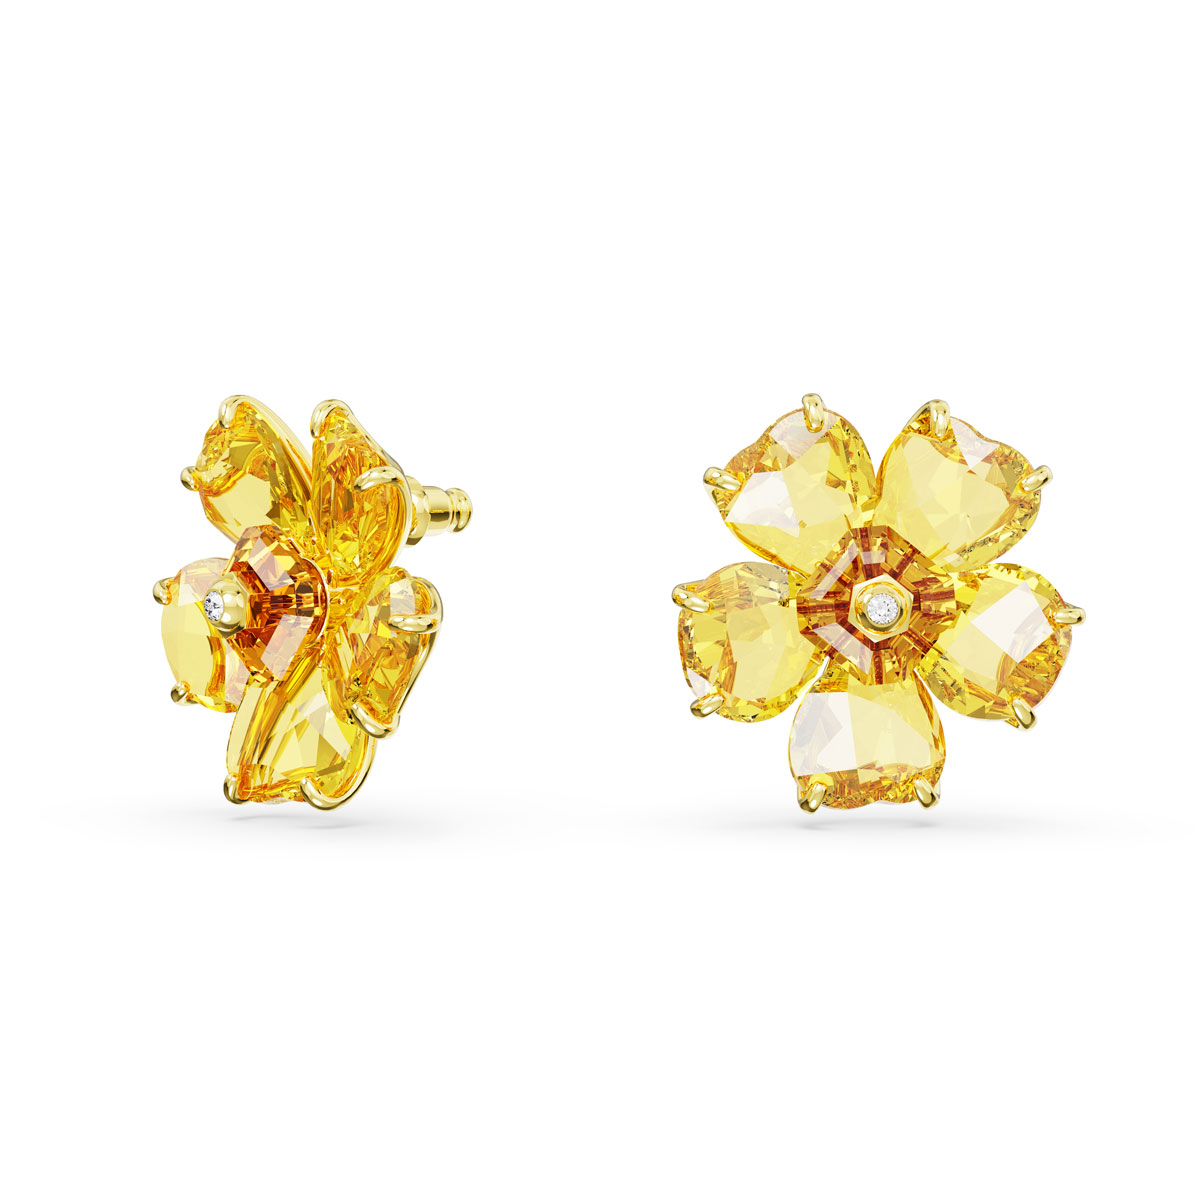 Swarovski Jewelry Florere Flower Yellow and Gold Pierced Earrings Pair